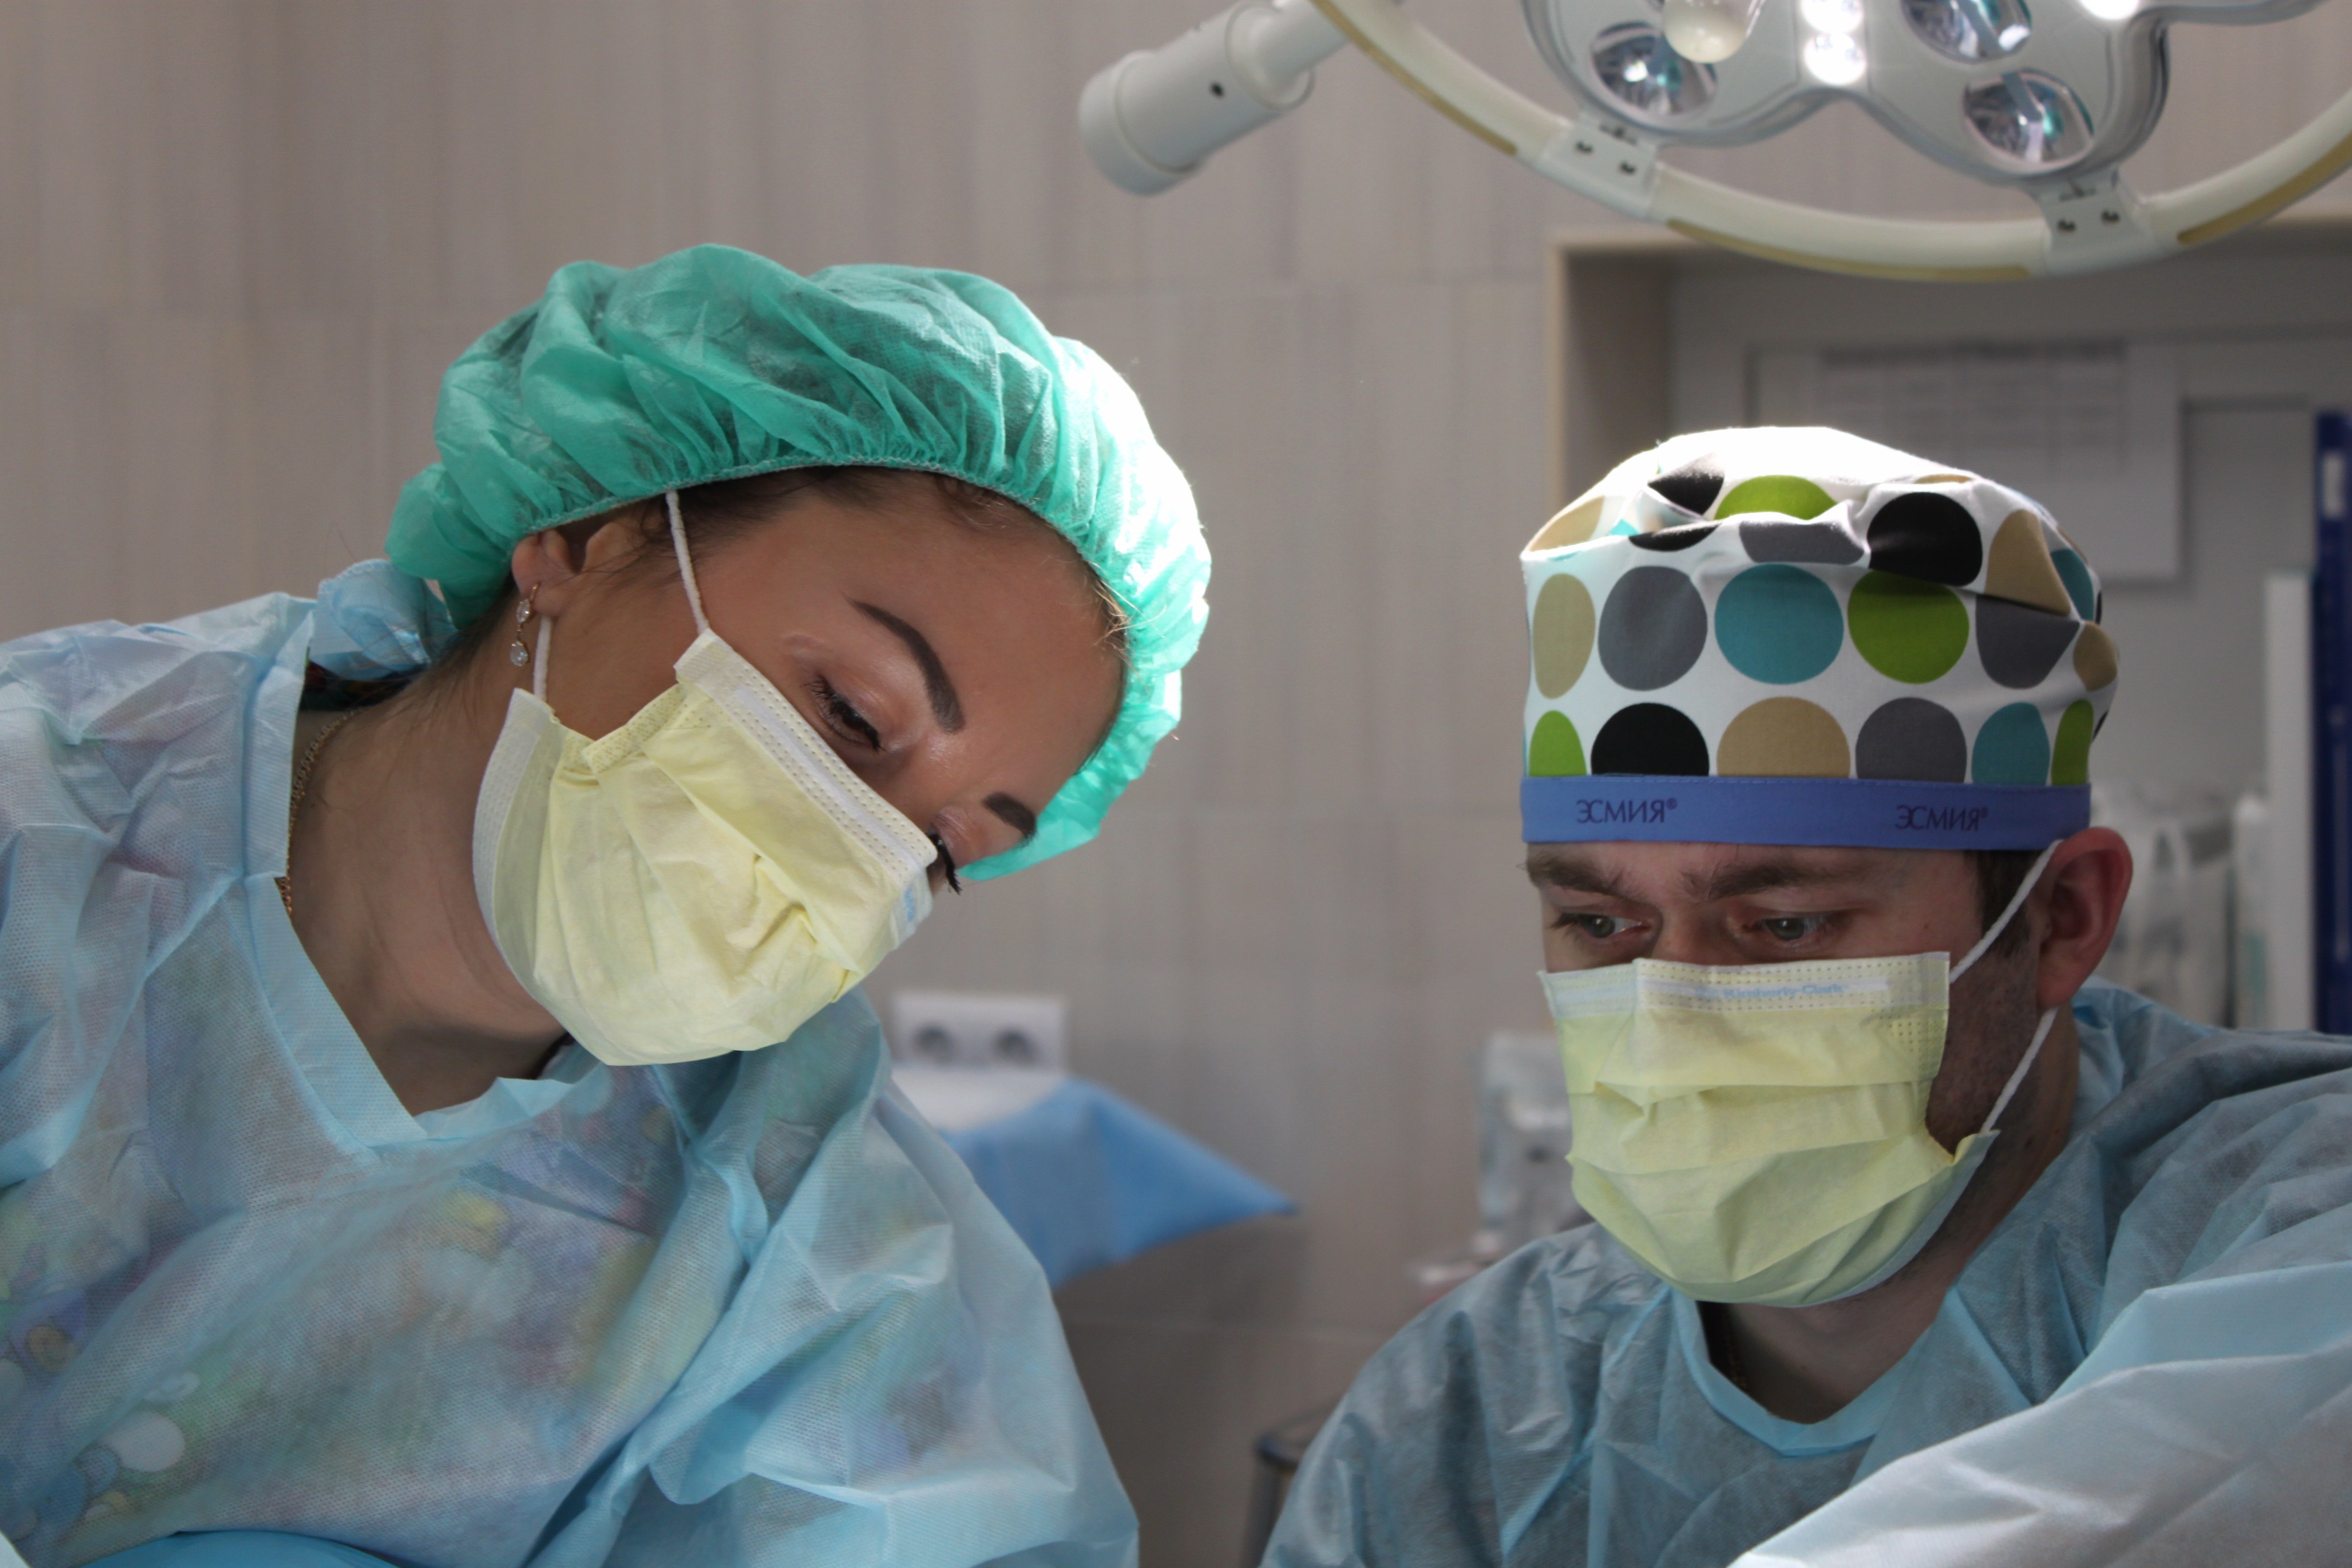 Pictured - An image of surgeons performing surgery | Source: Pexels 